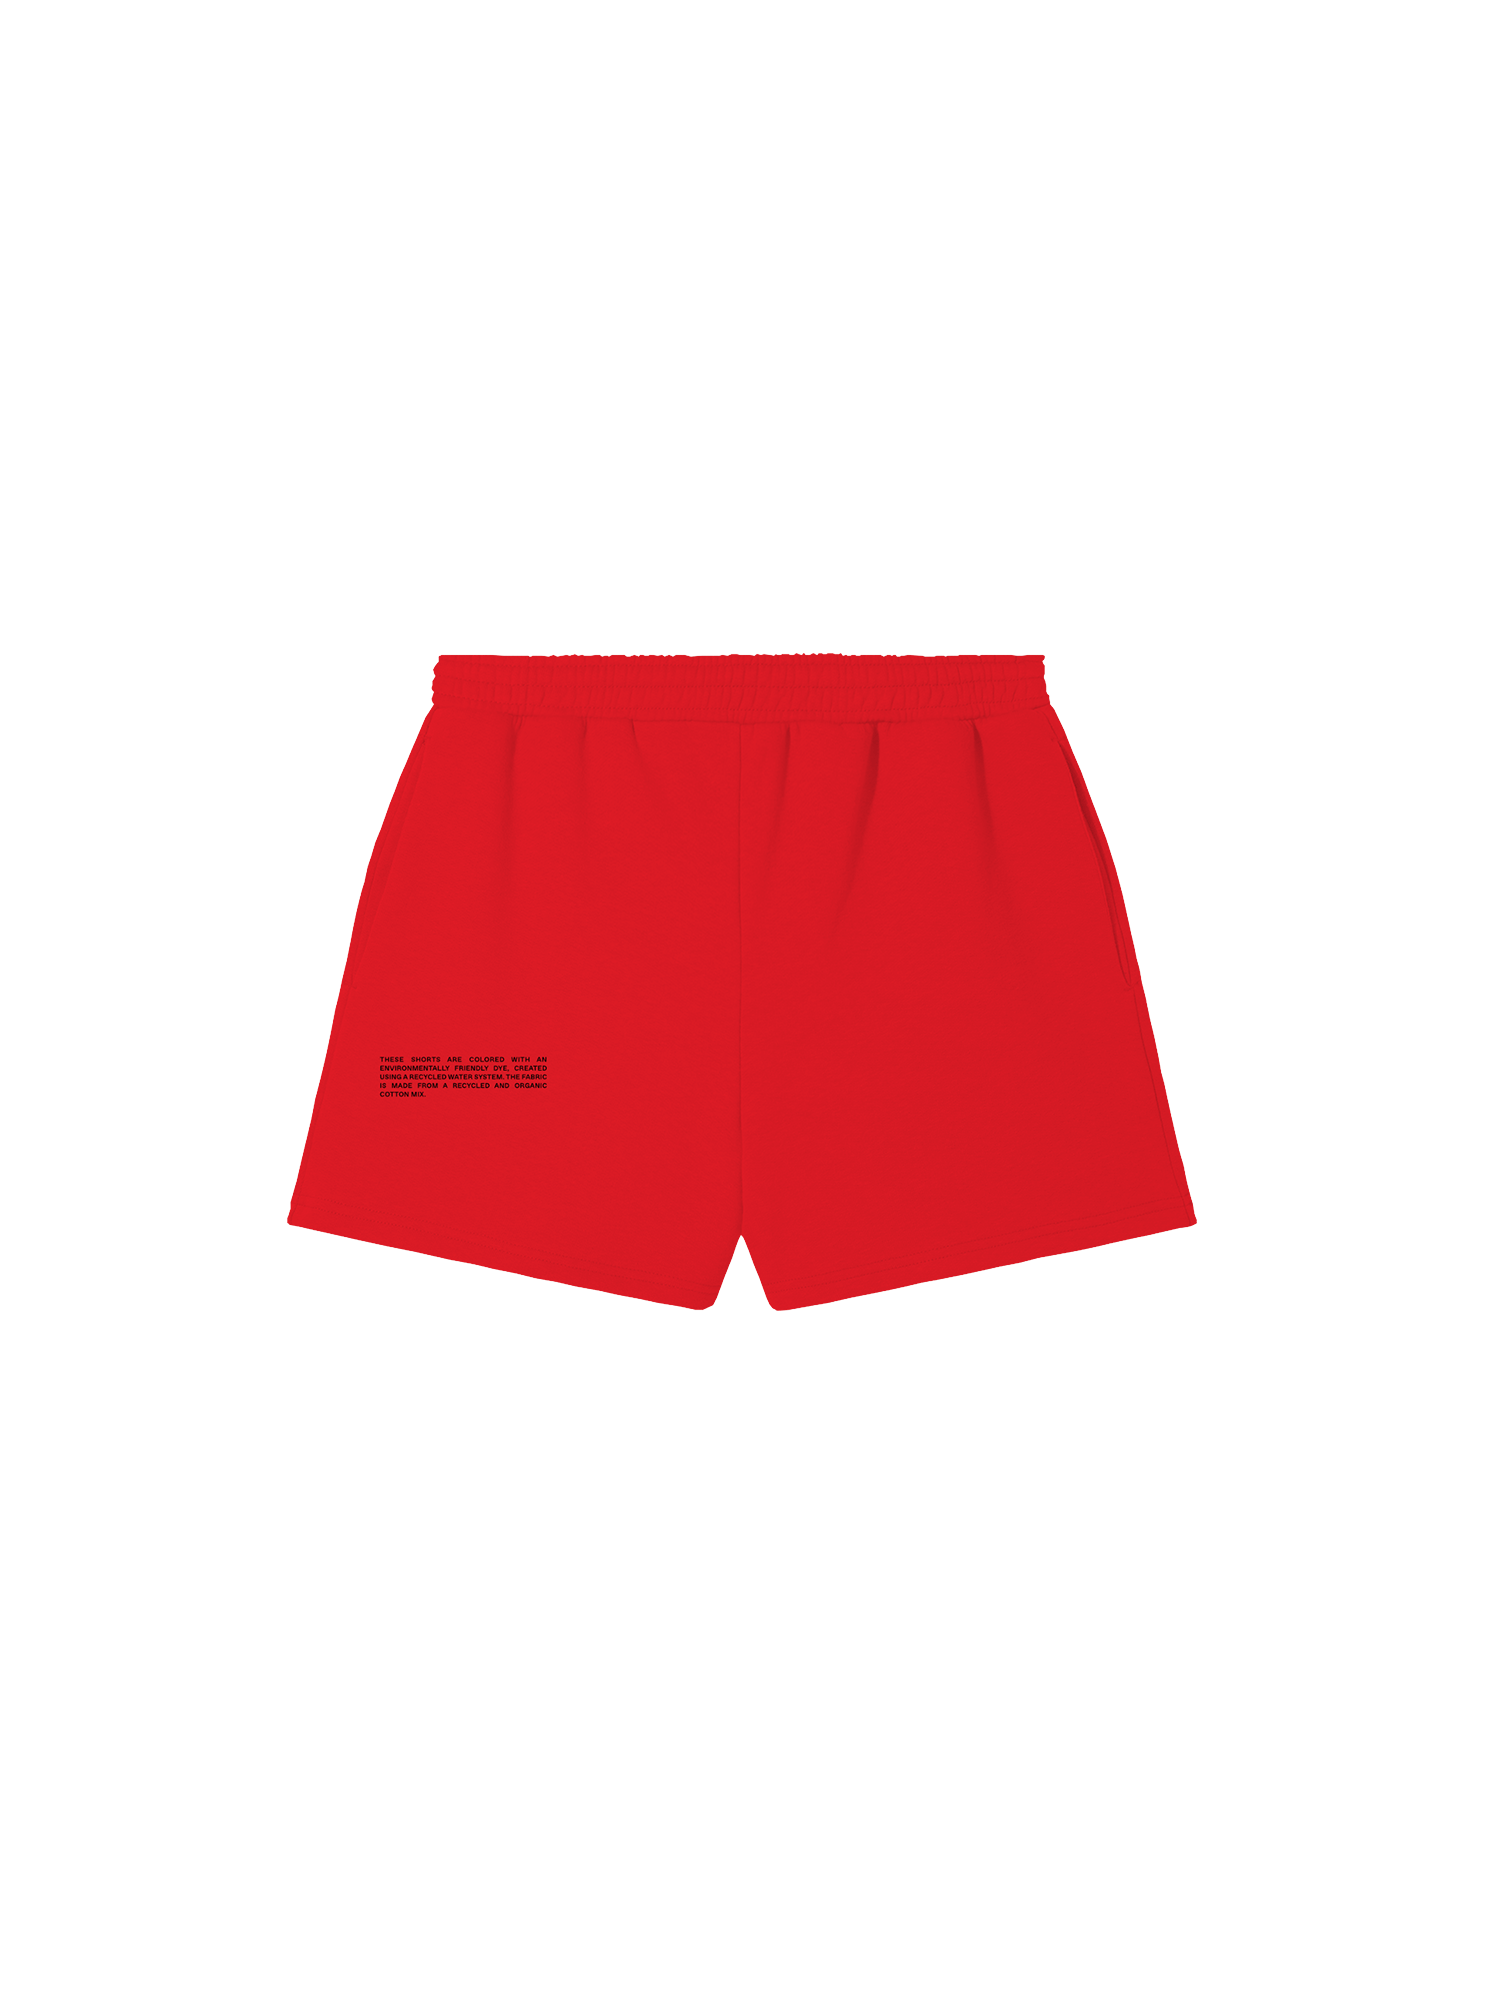 https://storage.googleapis.com/download/storage/v1/b/whering.appspot.com/o/marketplace_product_images%2Fpangaia-archive-lightweight-recycled-cotton-shortspoppy-red-vacgxZBoHt51qD1KruTaLs.png?generation=1692075635738238&alt=media